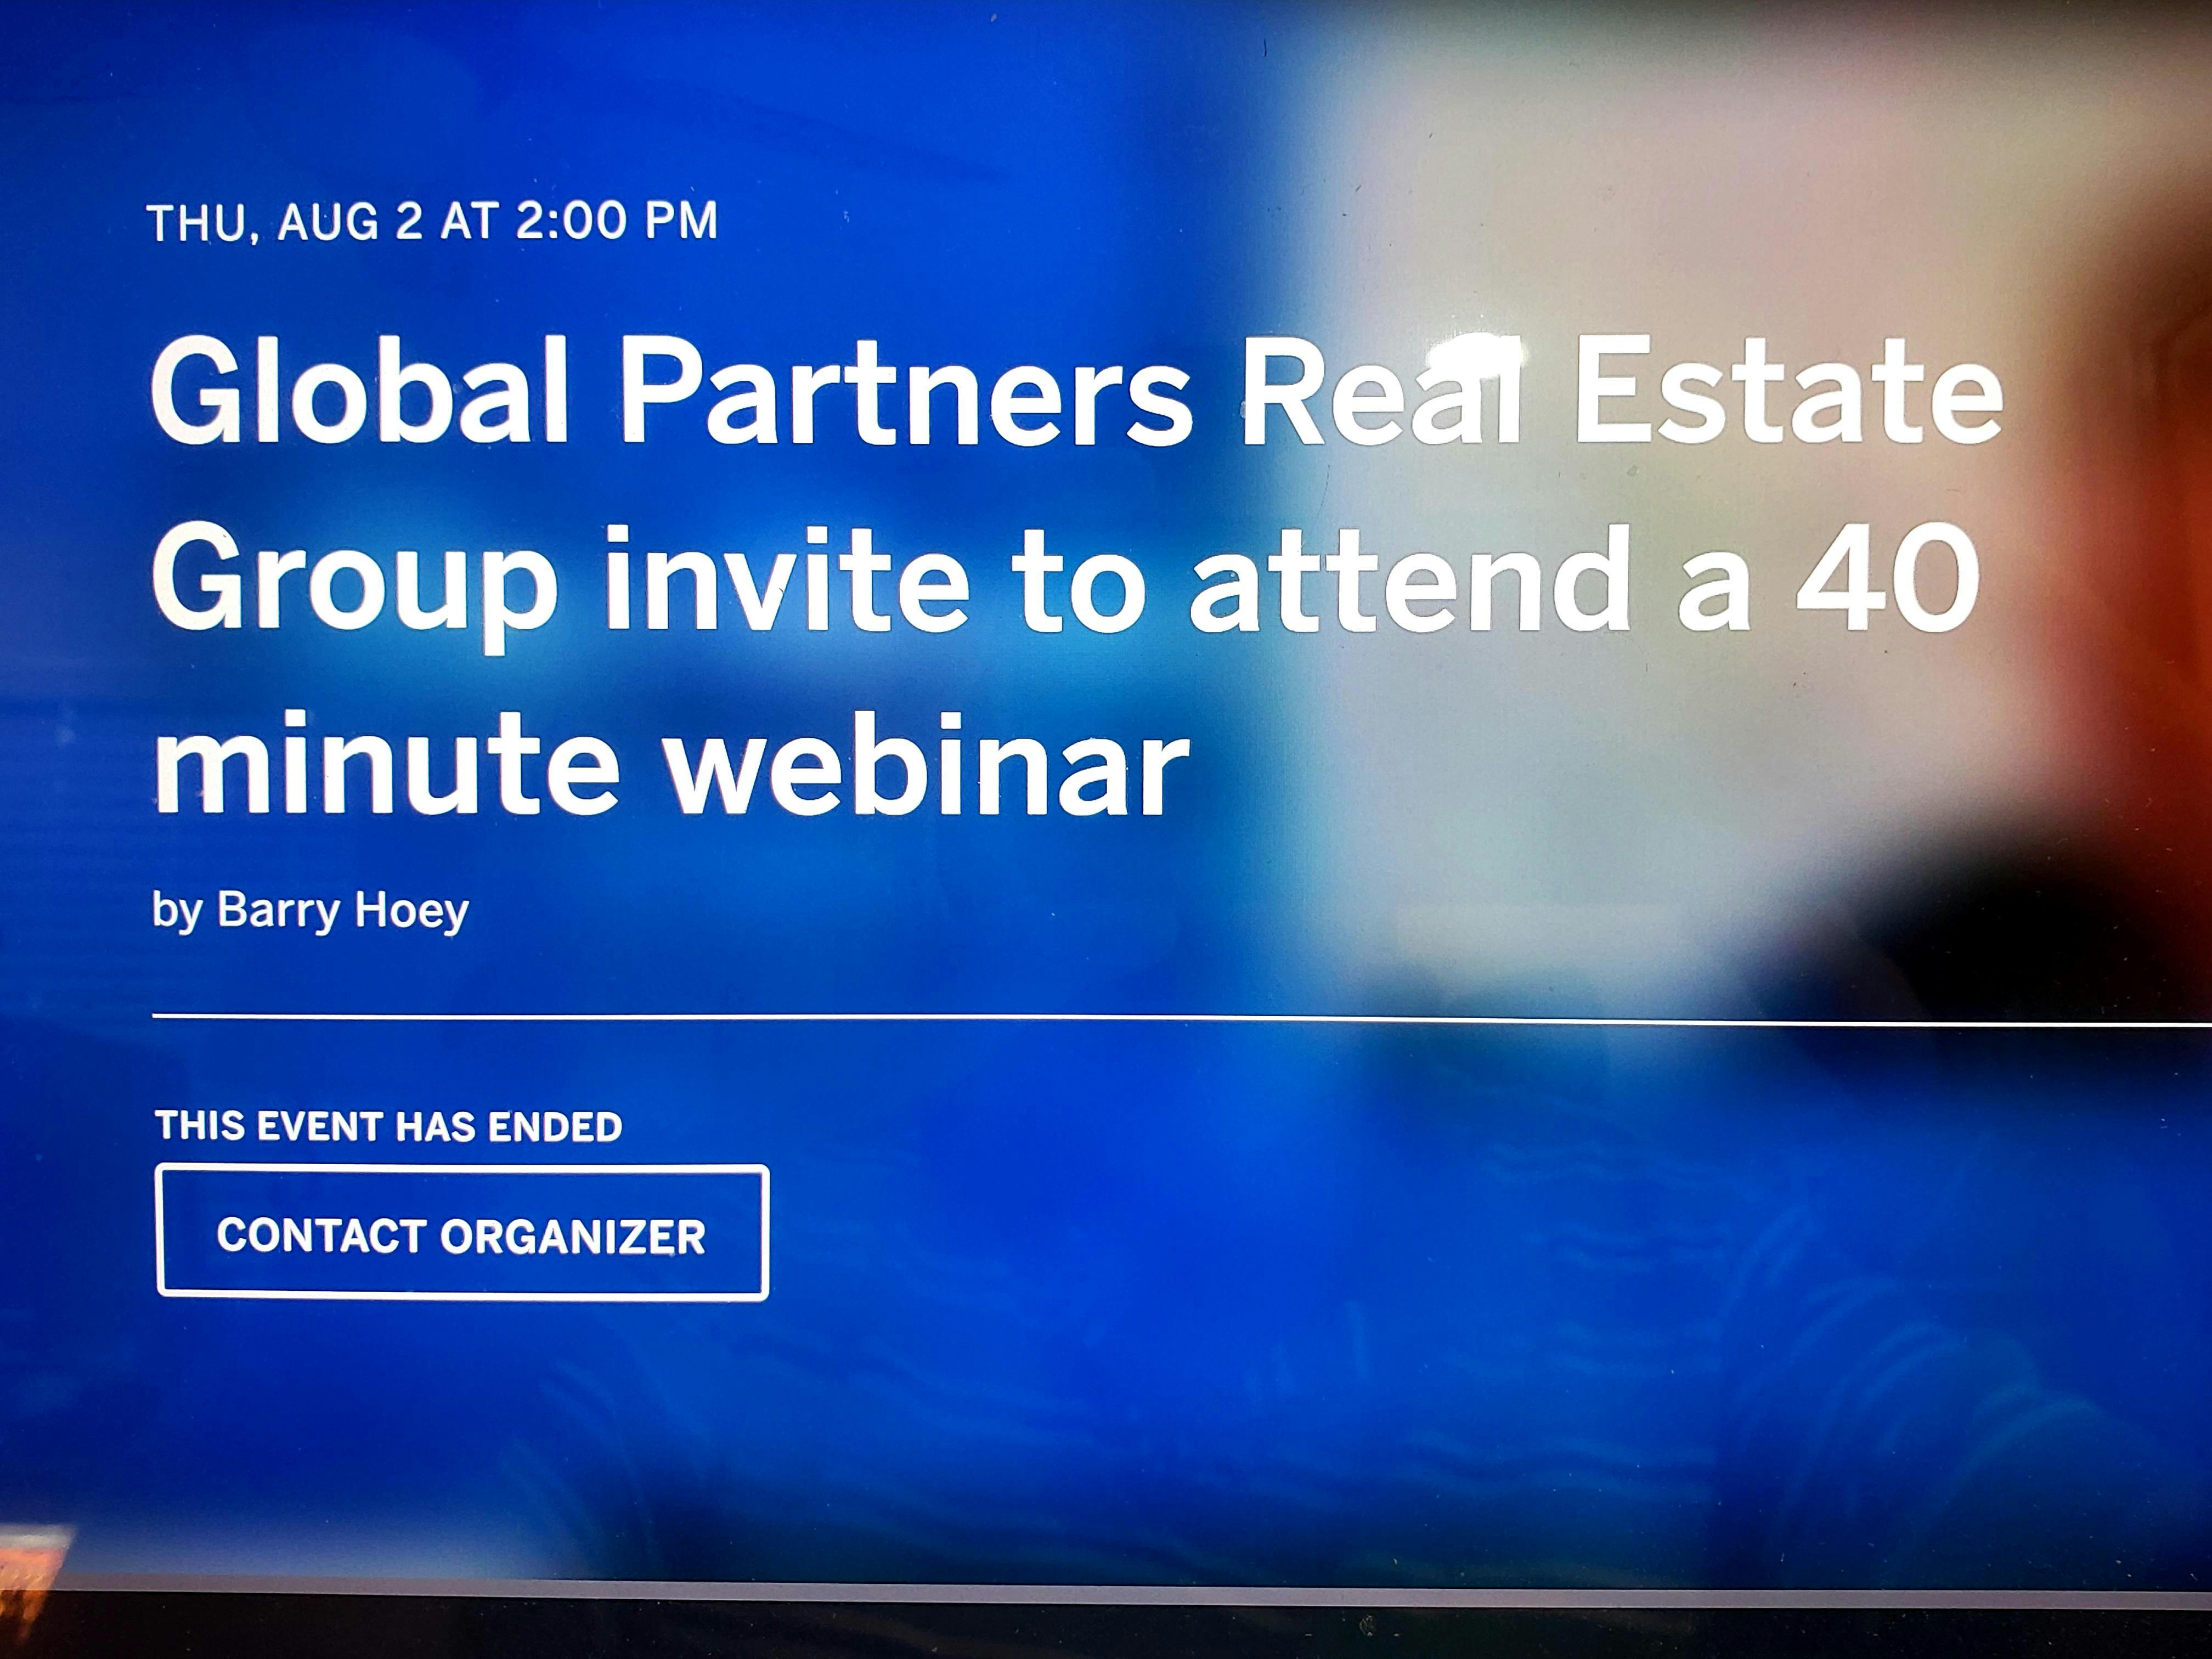 Invite for REALTORS to attend one of our Sponsors Evening Webinars